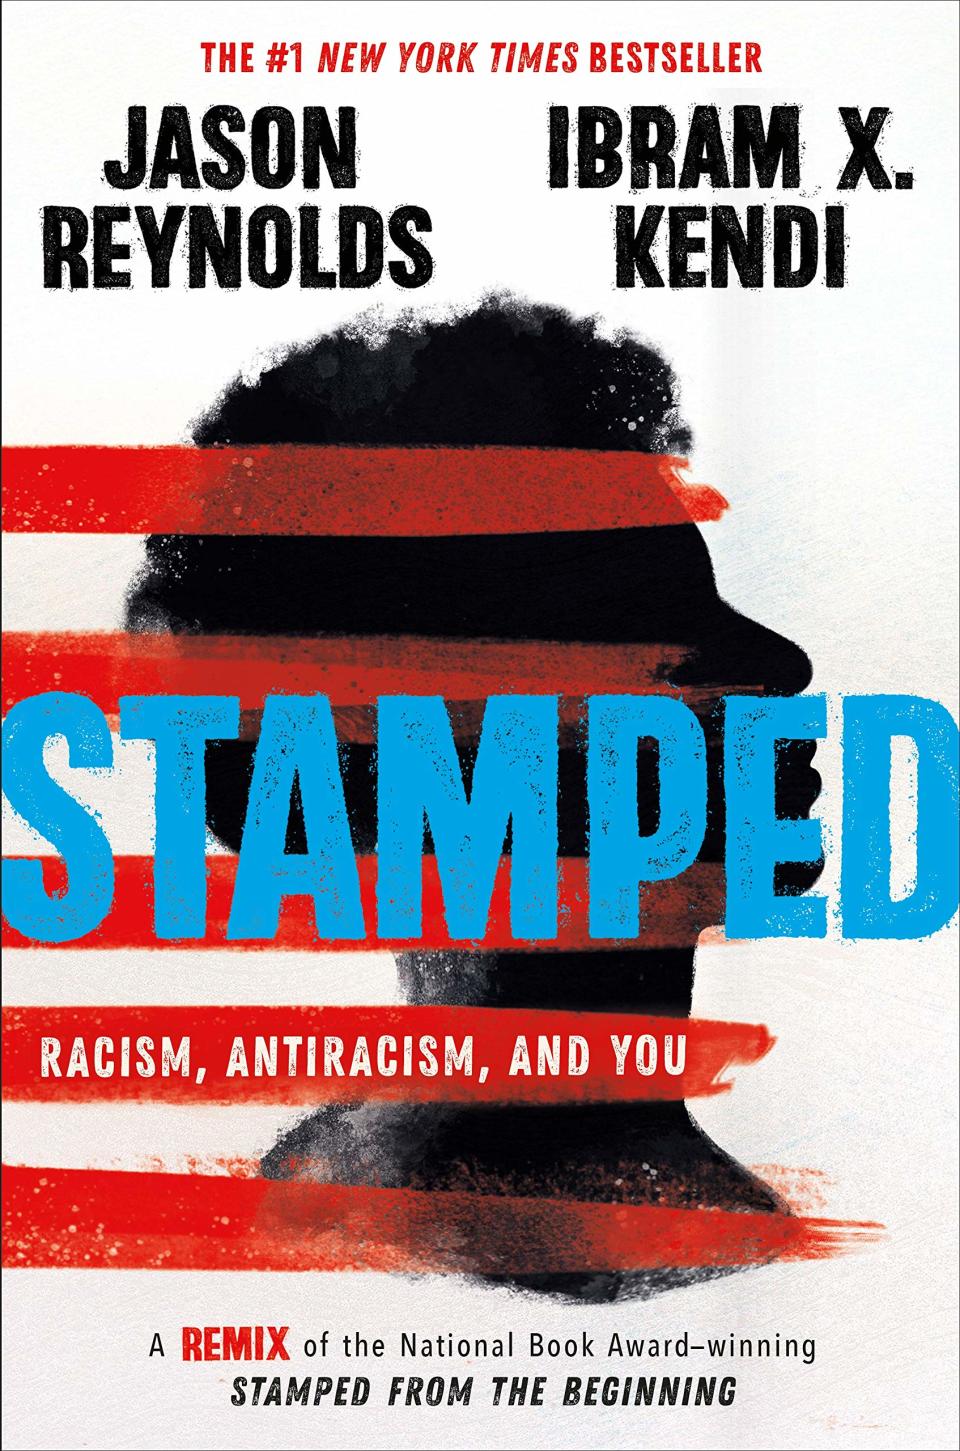 “Stamped: Racism, Antiracism, and You” by Jason Reynolds and Ibram X. Kendi. Published 2020.